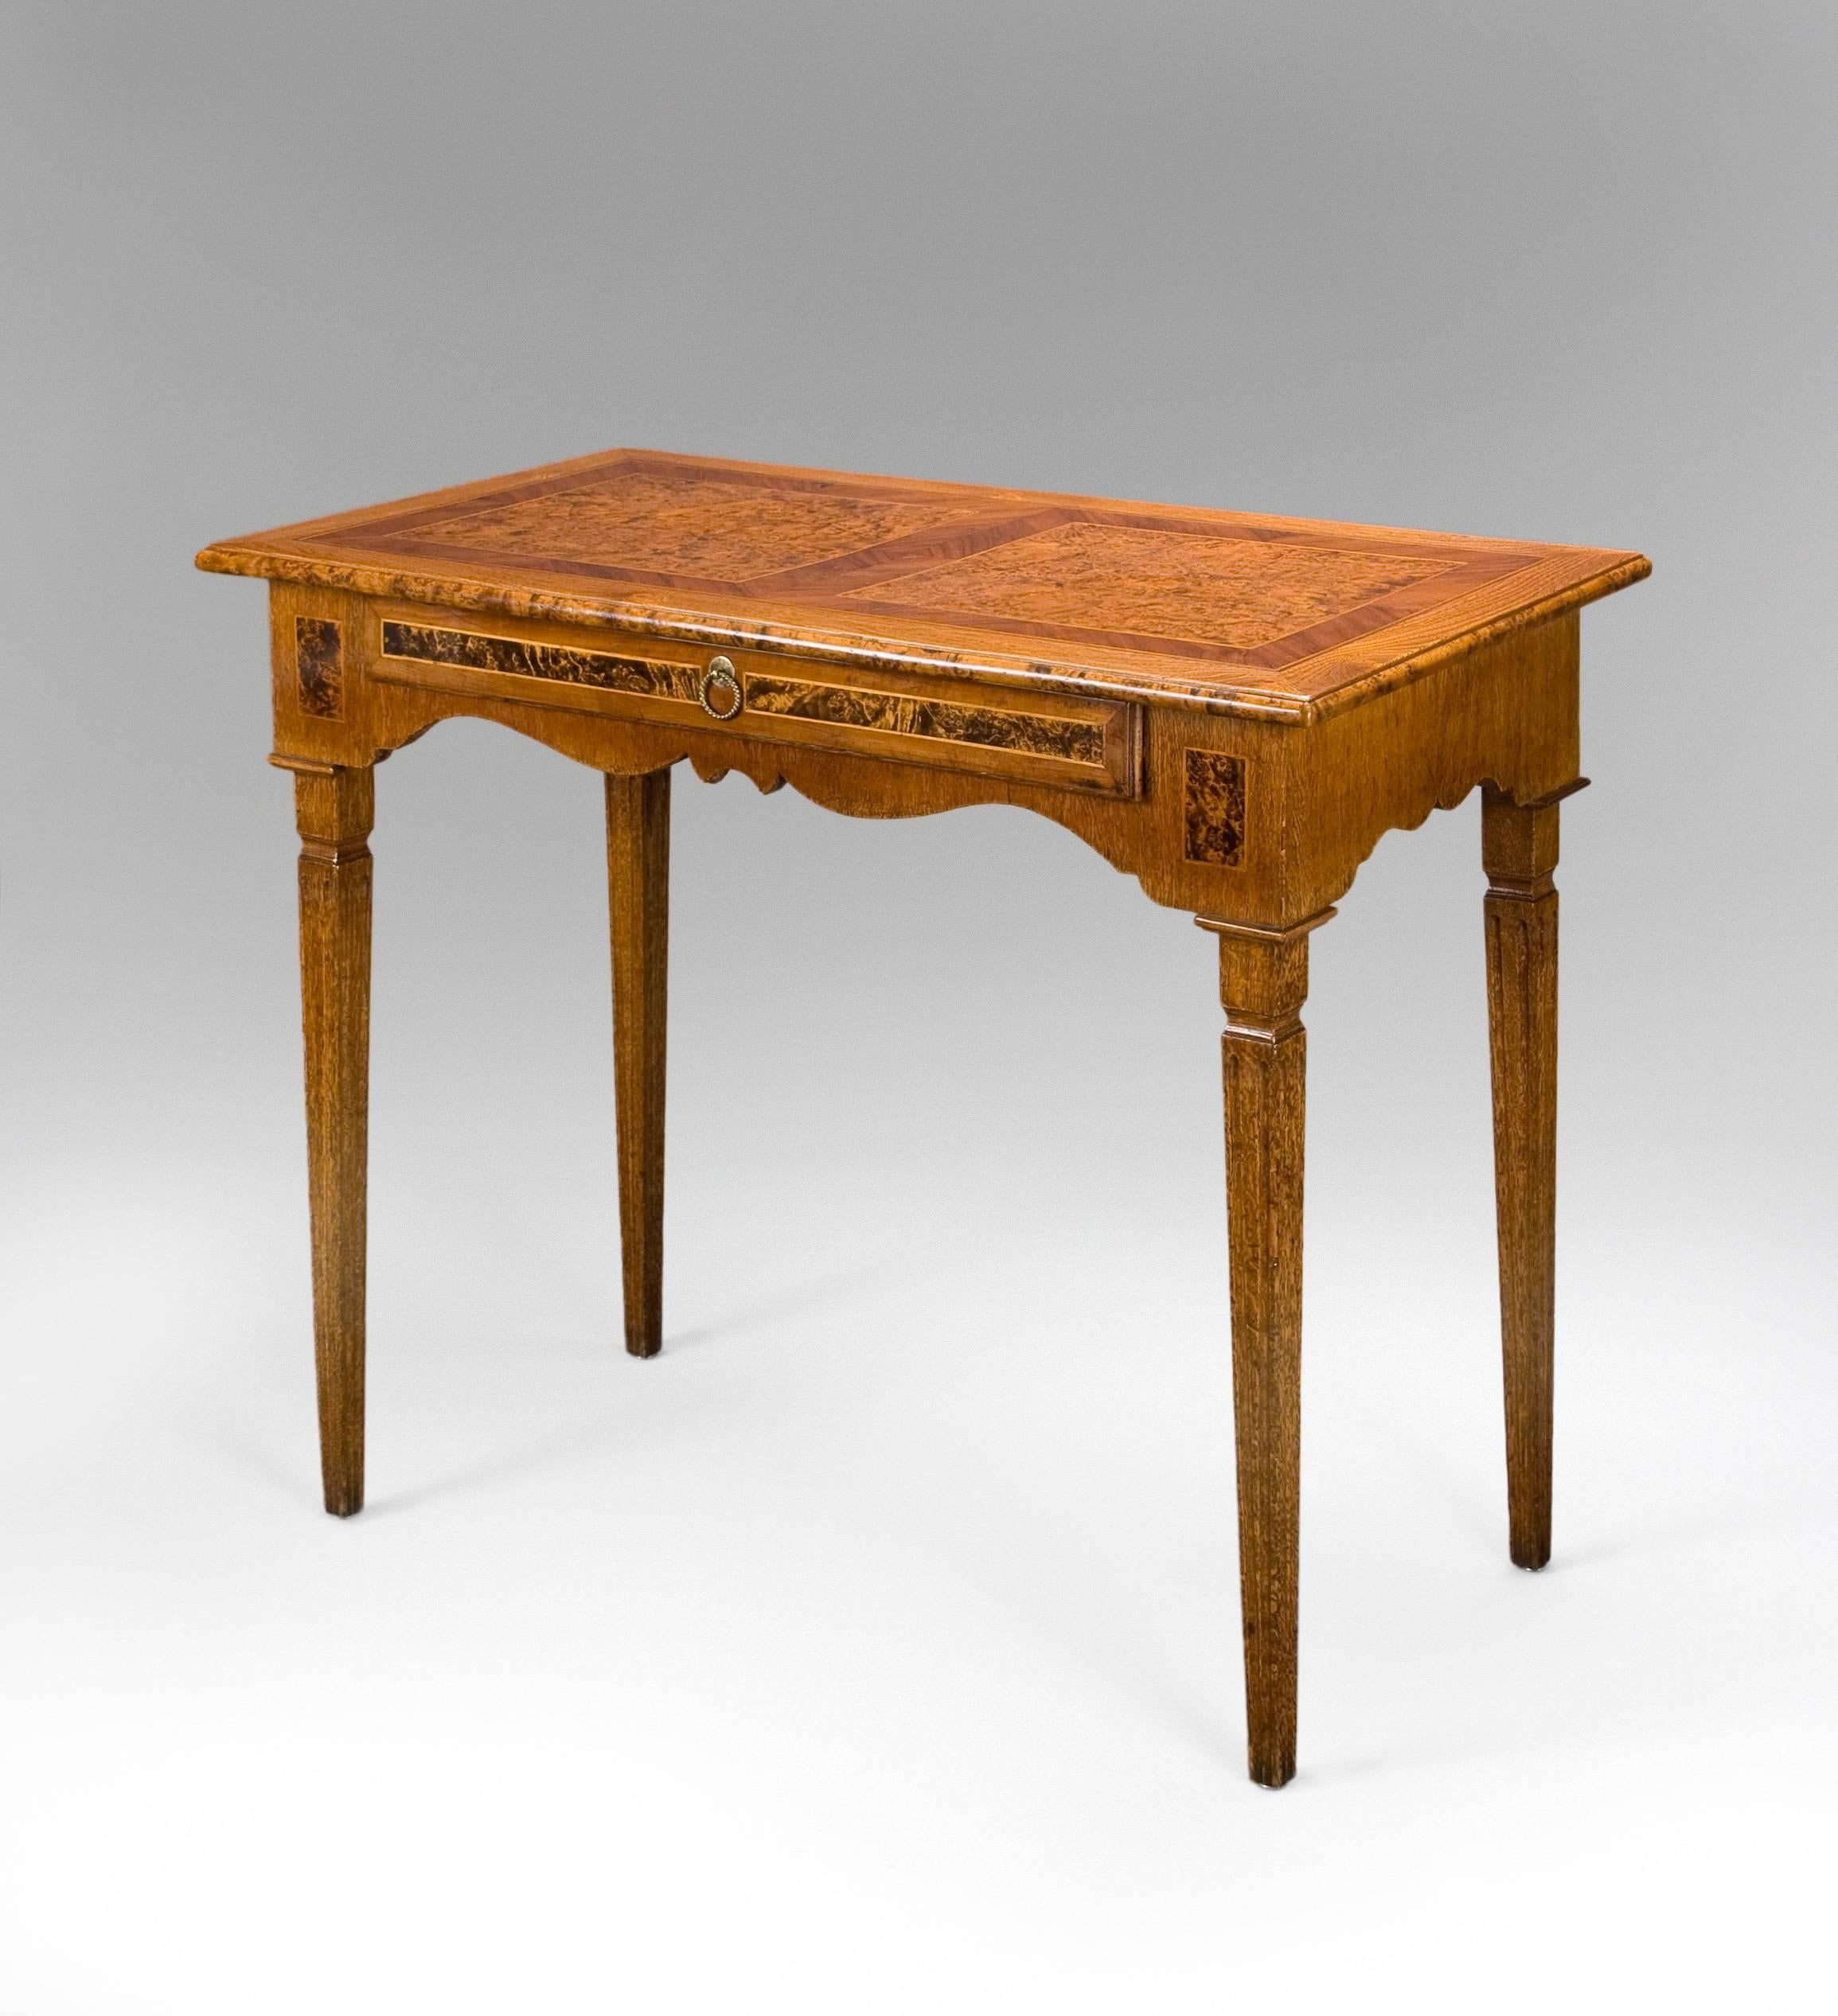 A charming table of choice woods in an attractive pattern. The rectangular top with molded edge and two burlwood panels bordered by fruitwood, above a serpentine frieze containing one drawer, raised on four square fluted, tapering legs.

Very good